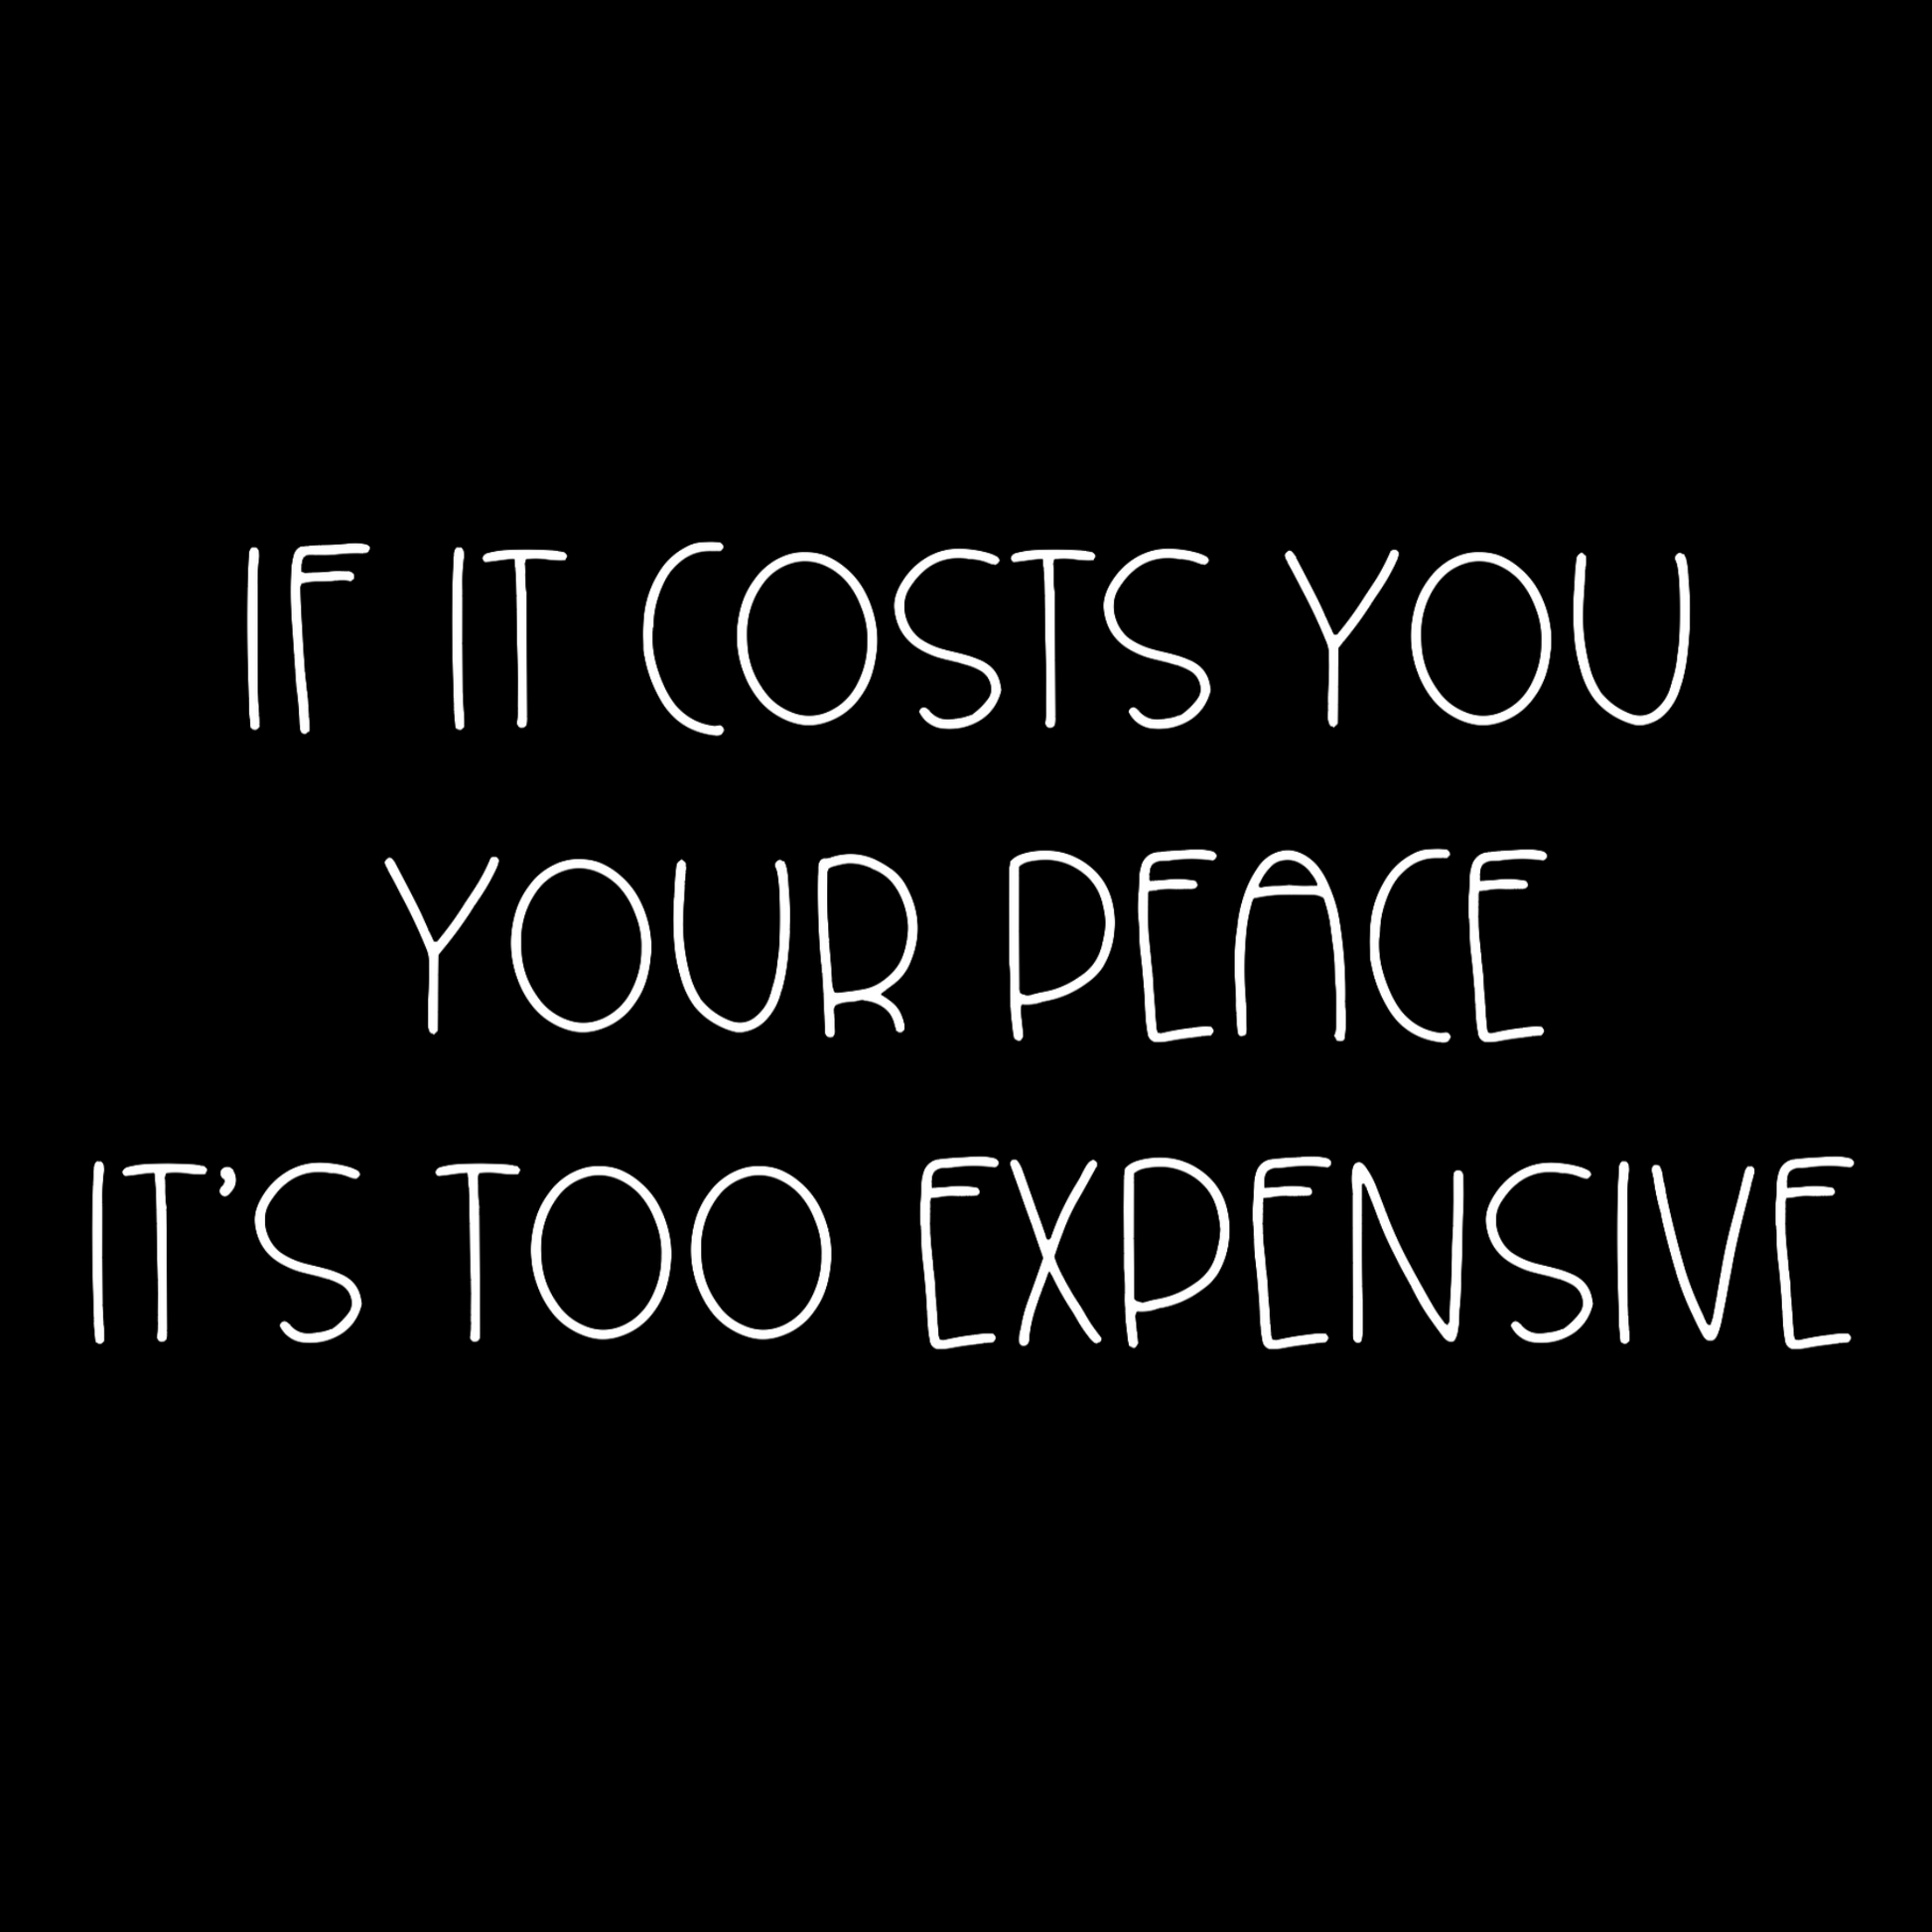 If It Costs You Your Peace It's Too Expensive T-Shirt in black with dainty white bold text. This is an image of the design in white on a black background,